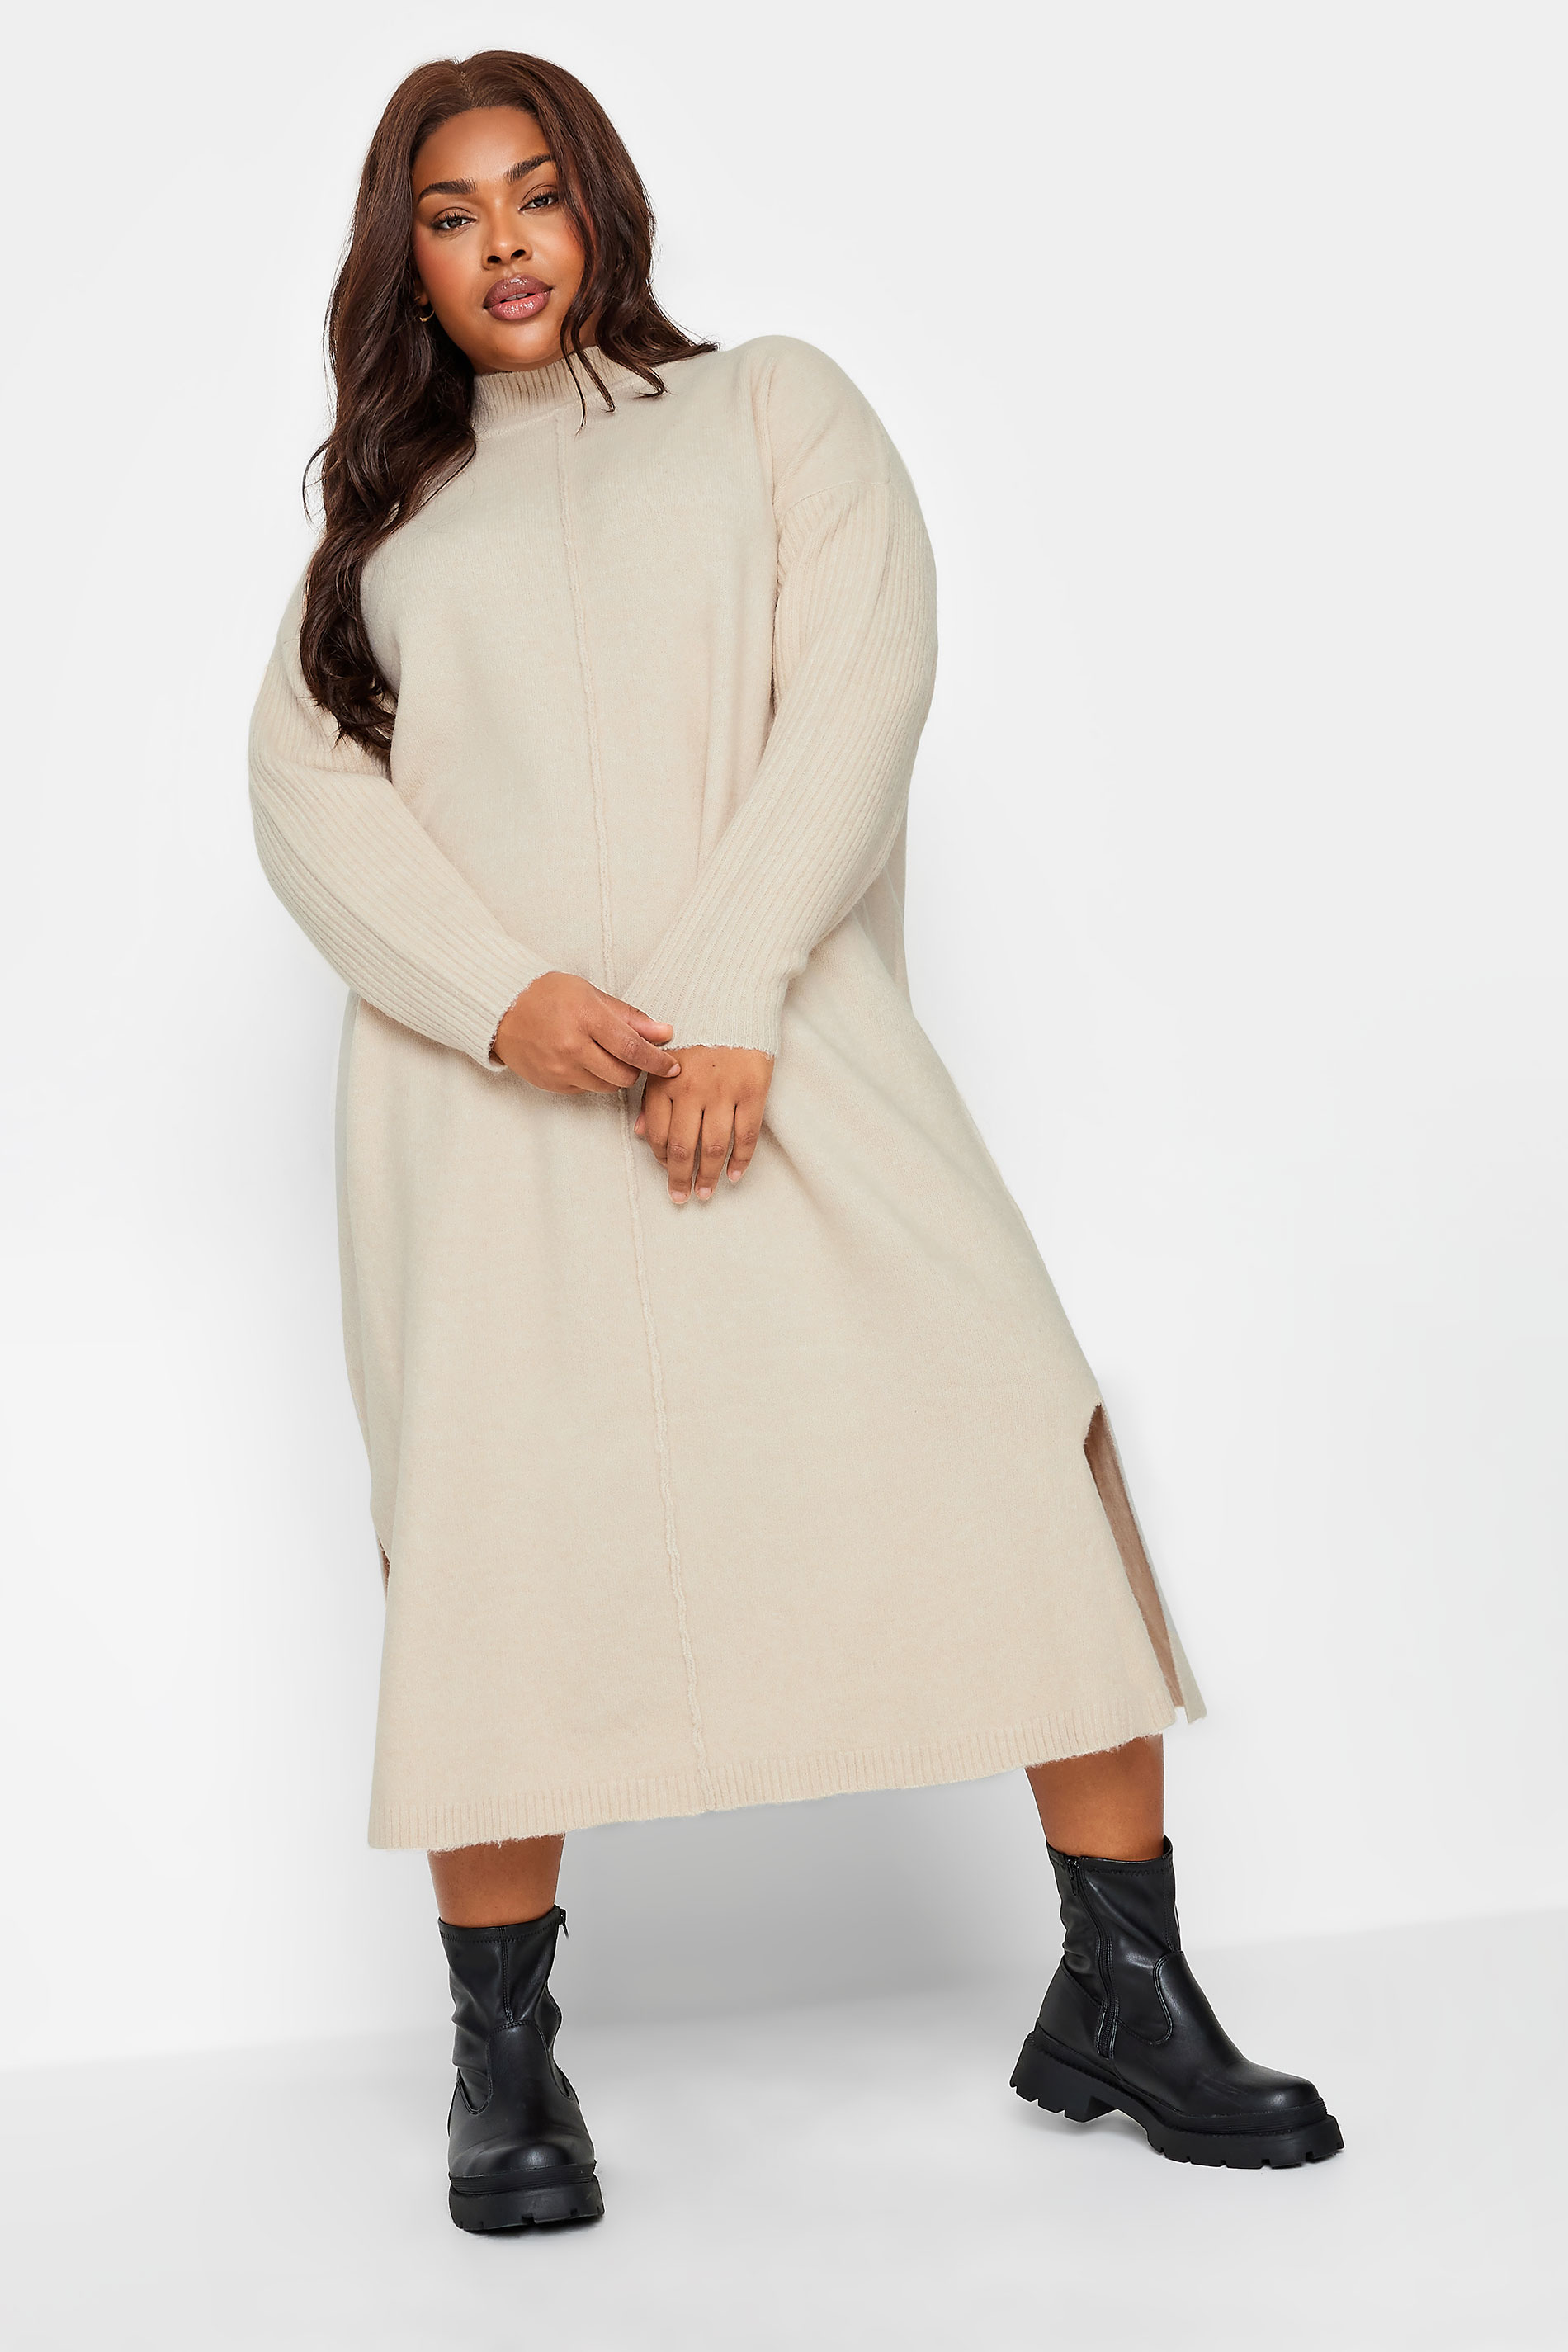 In The Style Nude Pearl Detail Cable Belt Jumper Dress - Matalan